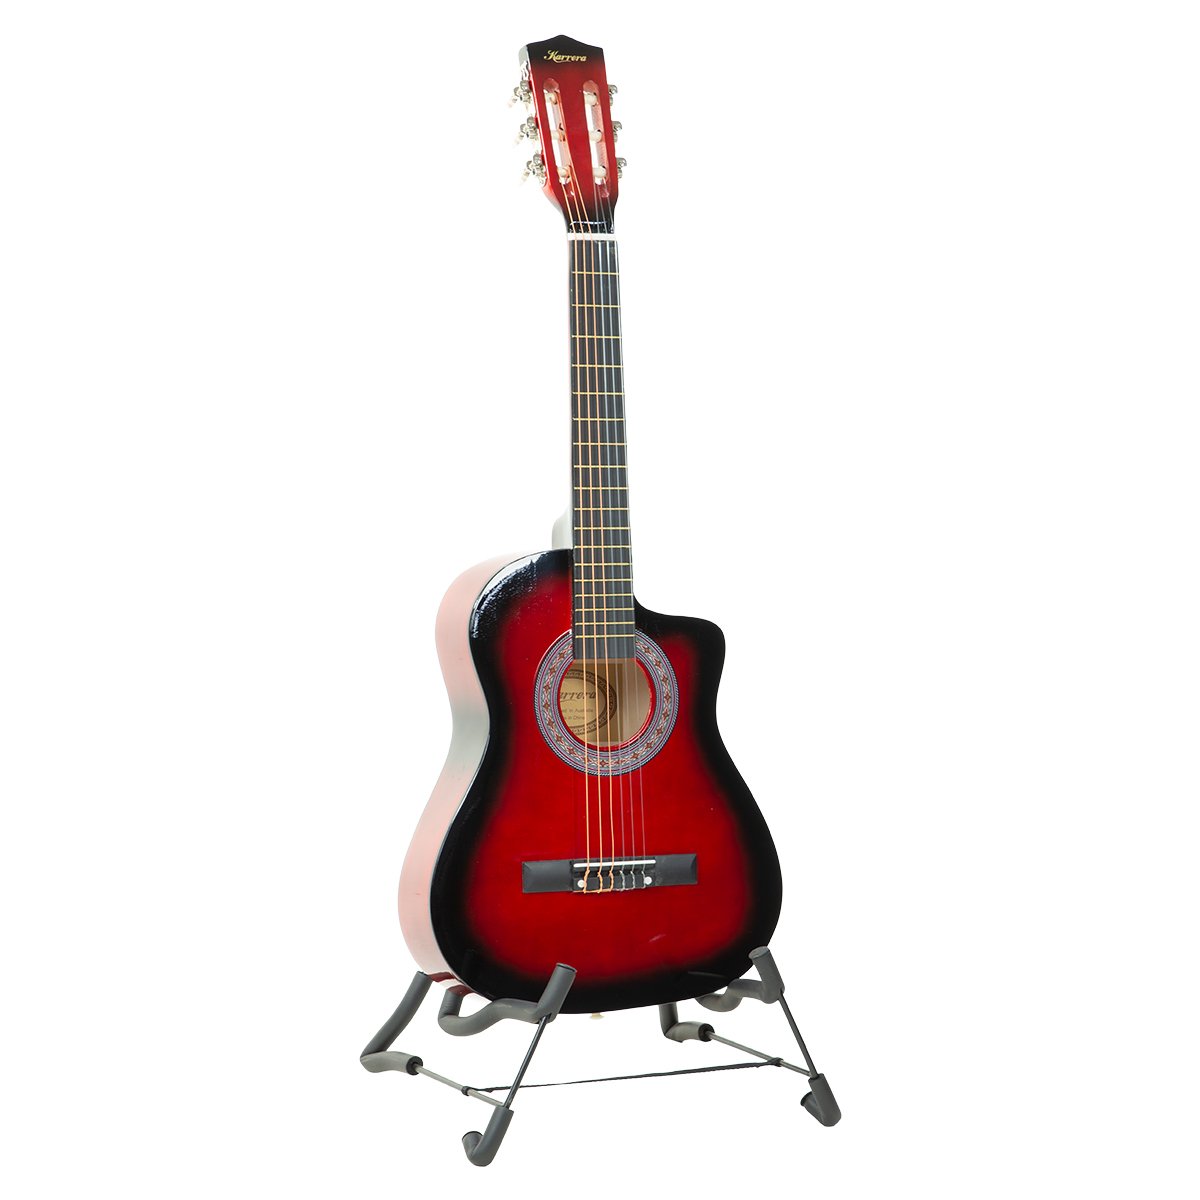 38in Pro Cutaway Acoustic Guitar with guitar bag - Red Burst